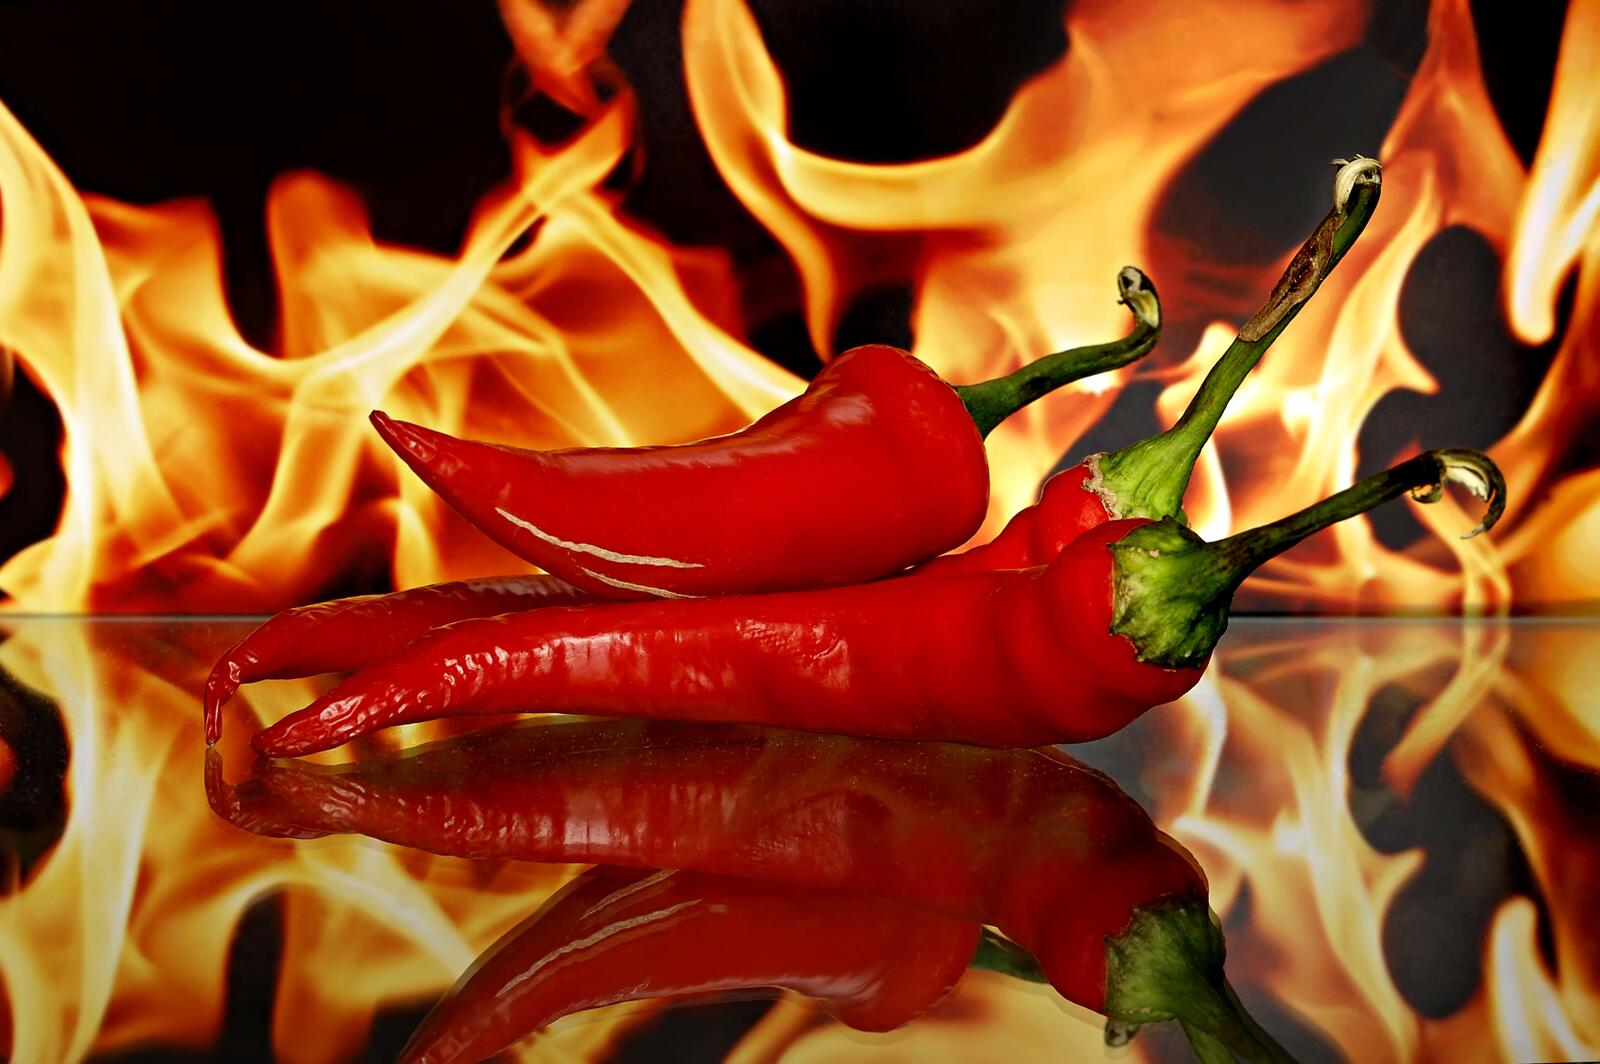 Wallpapers red peppers flame vegetables on the desktop